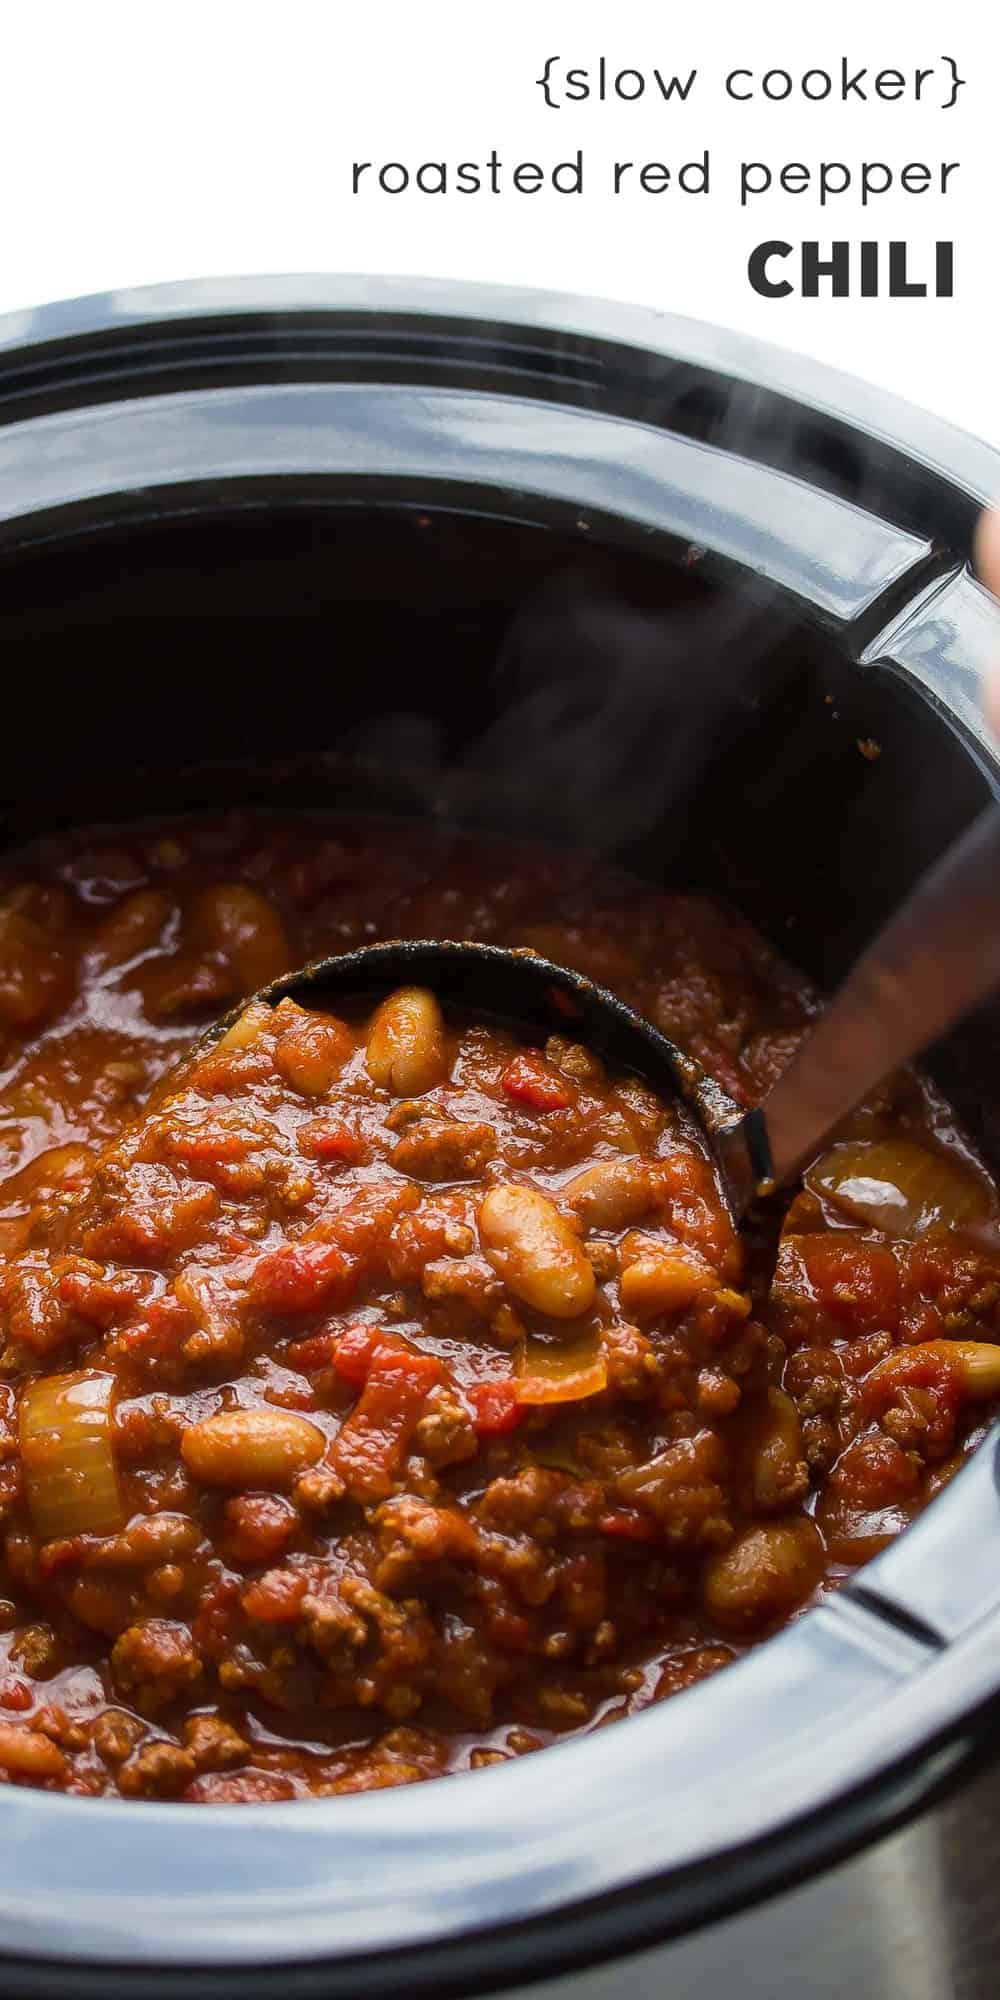 ladle spooning the slow cooker roasted red pepper chili